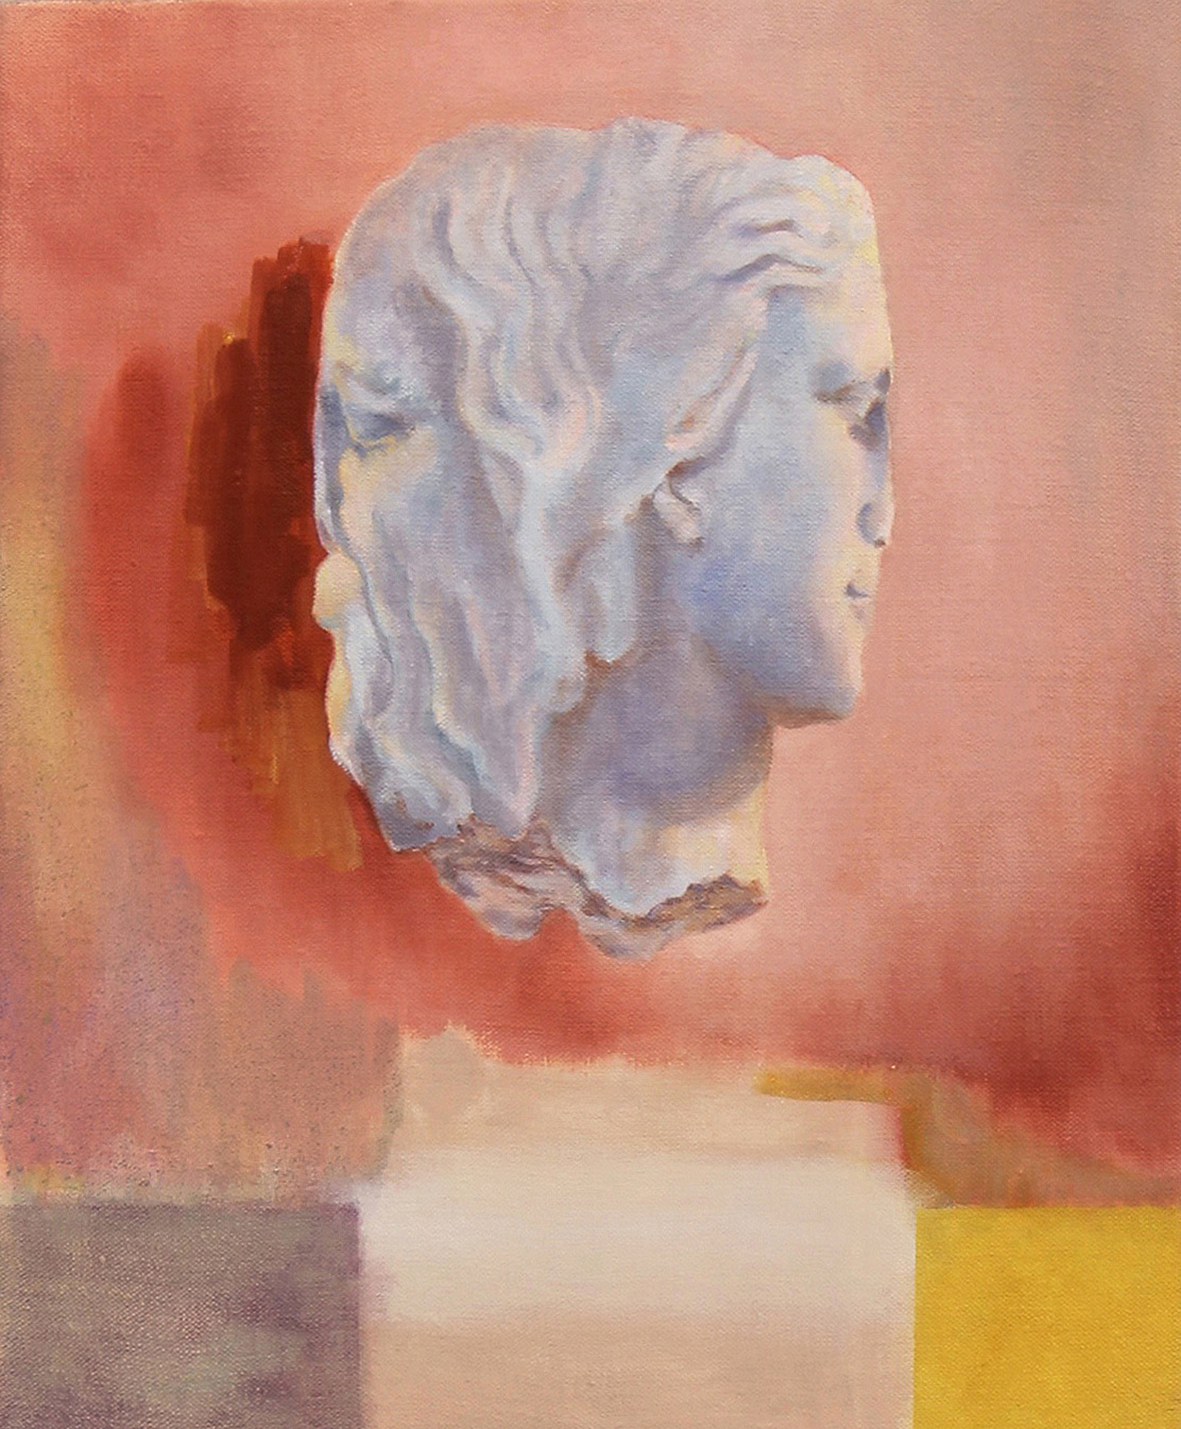 Flora Whiteley, Shake of the Head, 2012, oil and tempera on linen, 68x57cm